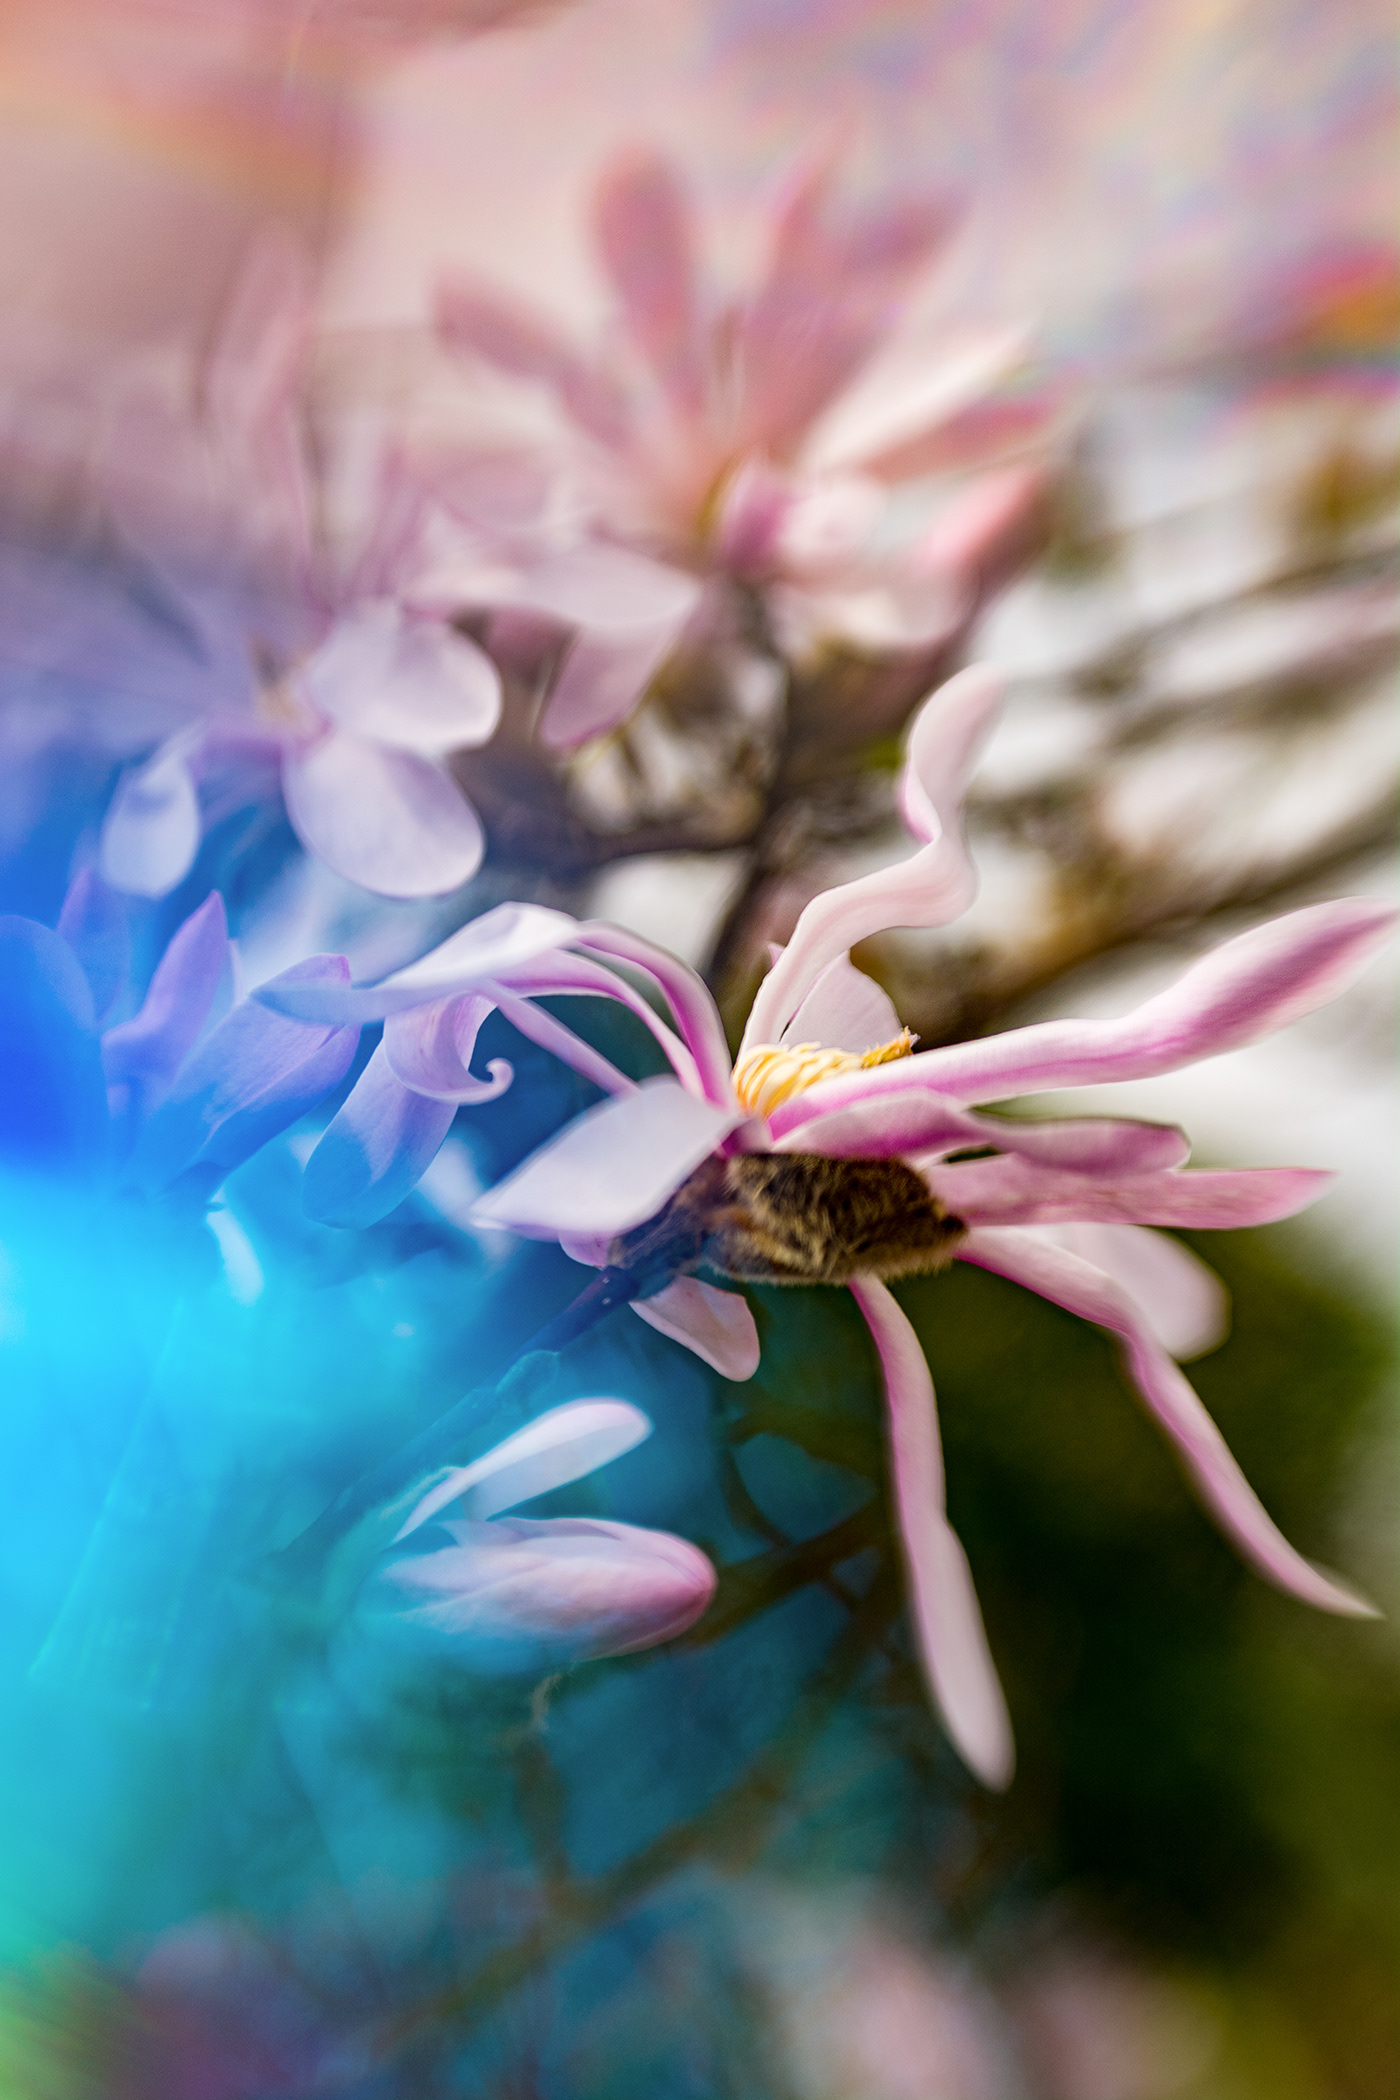 Magnolia phot in soft focus and with movement blur